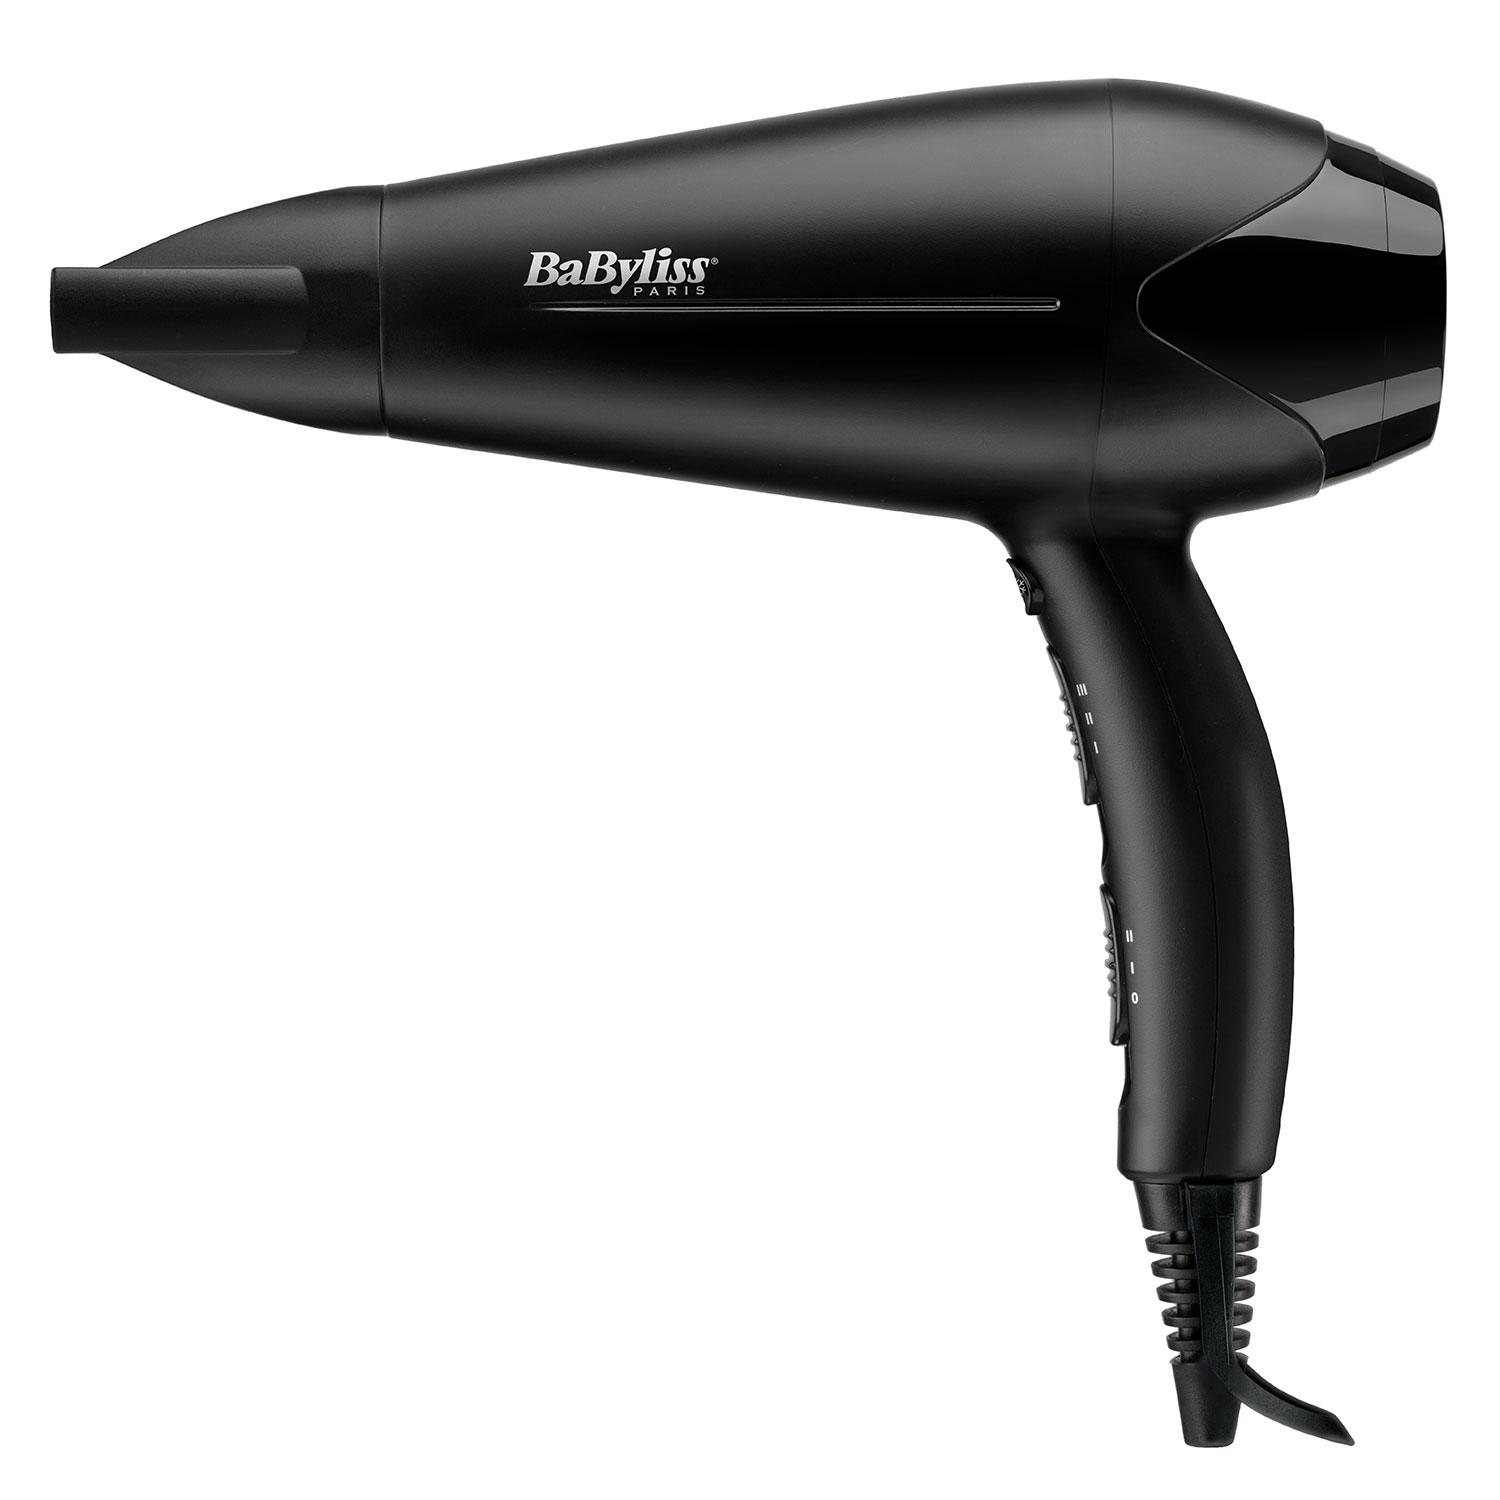 BaByliss - Hairdryer Power Dry 2100W D563DCHE